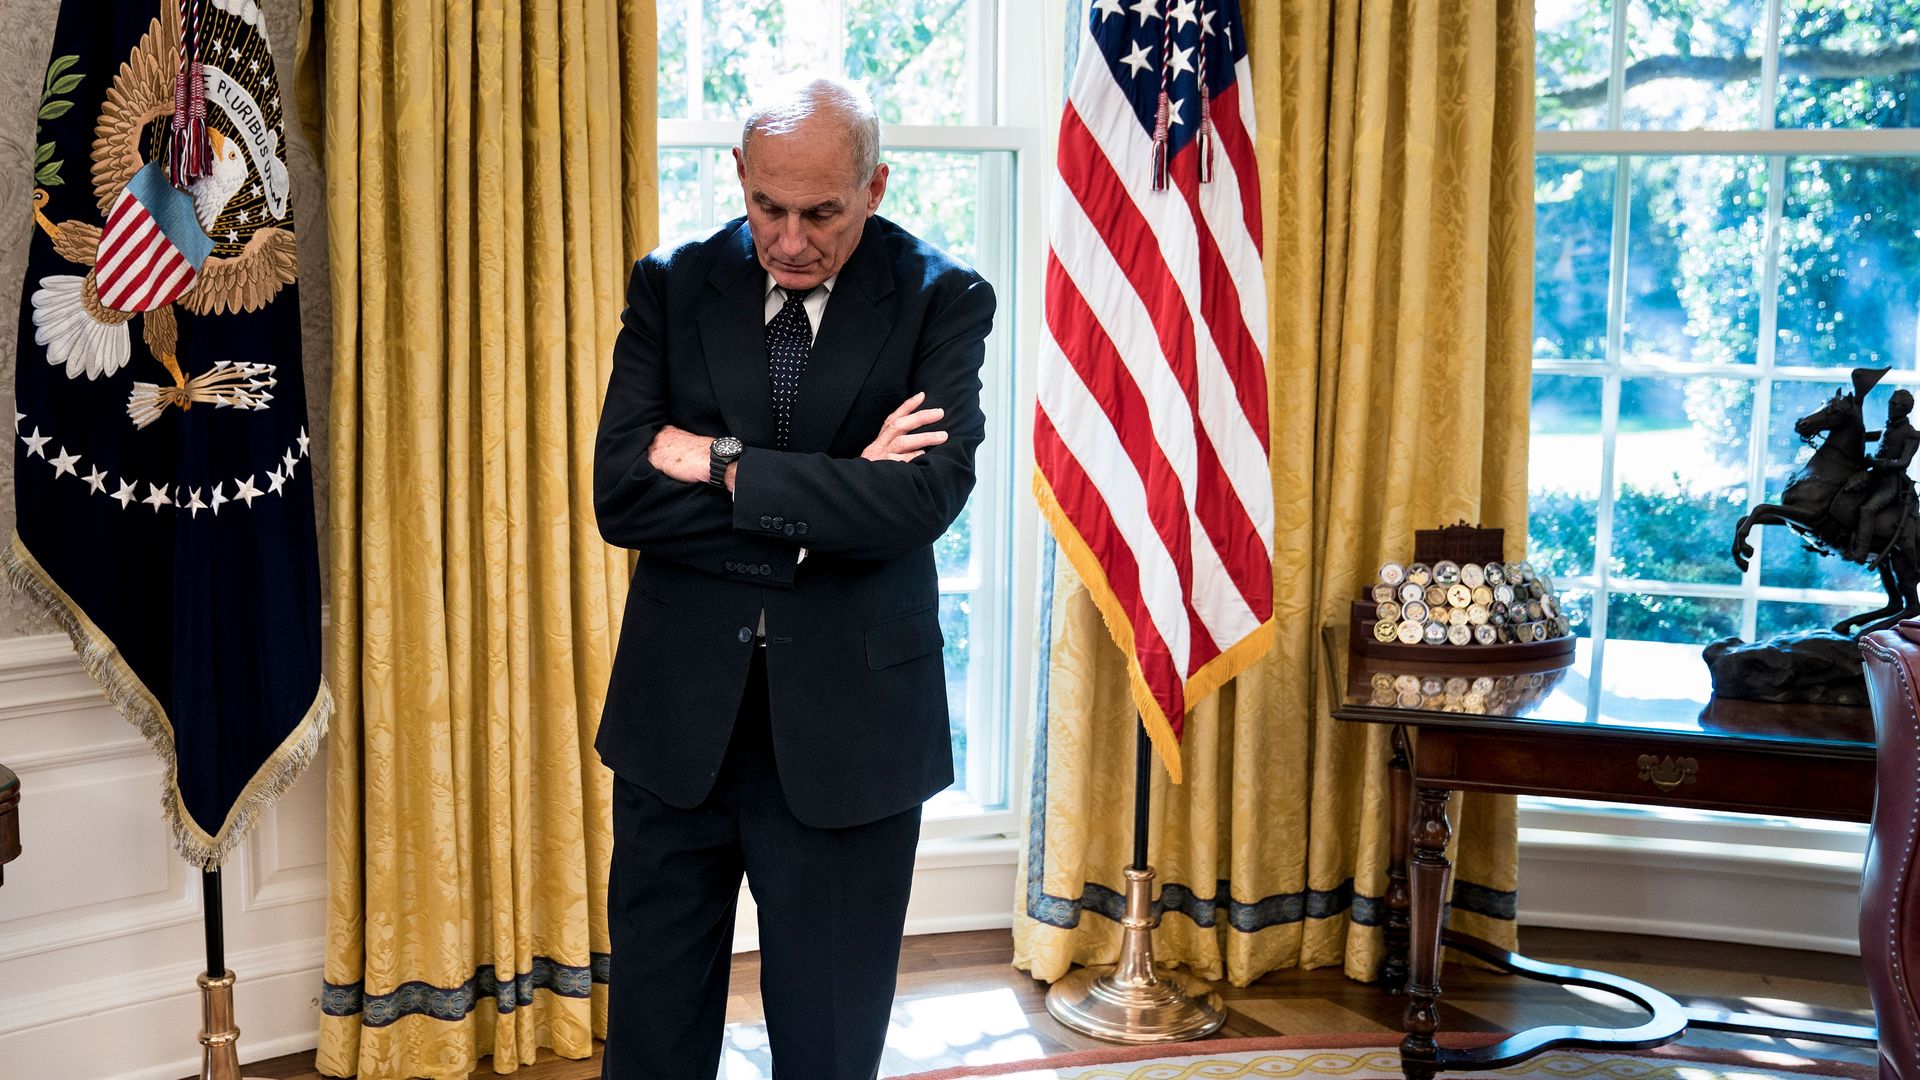 White House Chief of Staff John Kelly hangs his head while standing alone in the Oval Office of the White House 